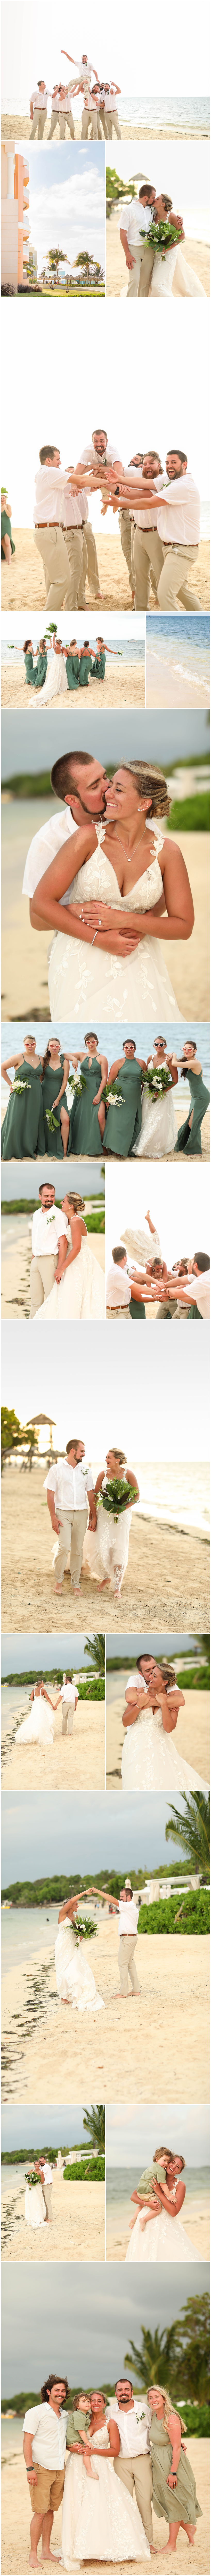 Bridal portraits along the beach in Montego Bay